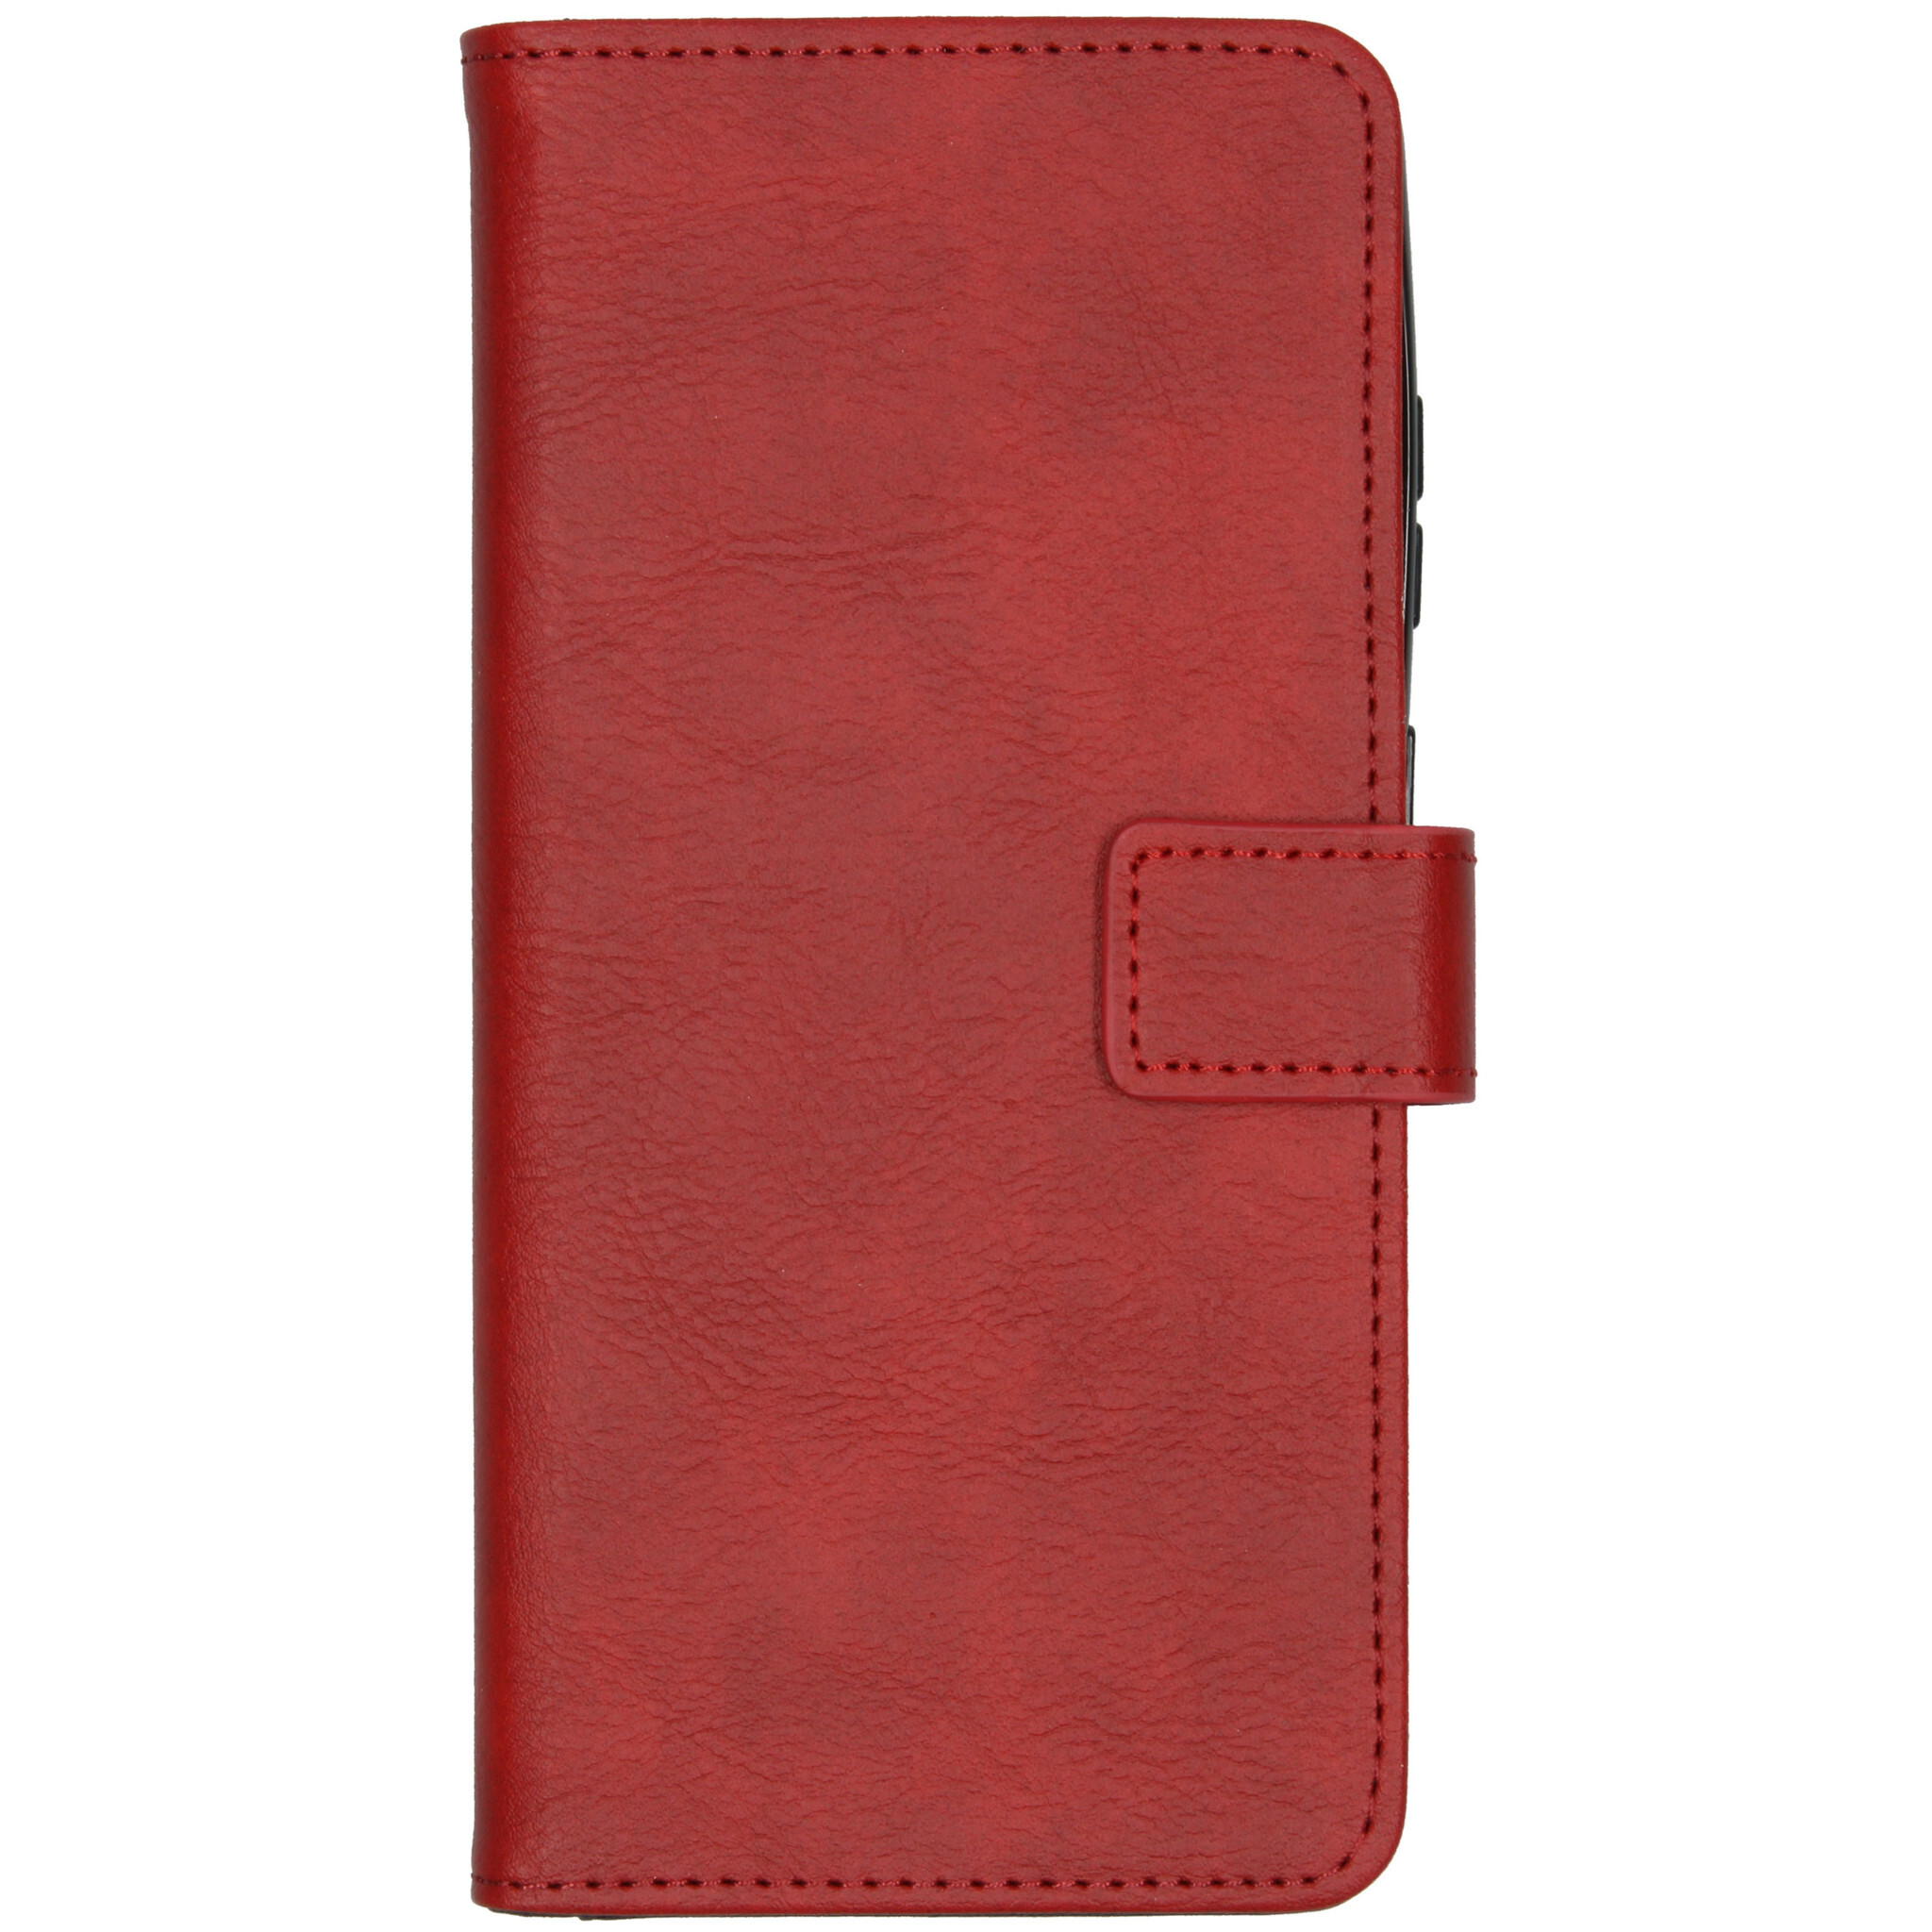 imoshion Luxe Booktype Samsung Galaxy S20 Ultra hoesje - Rood